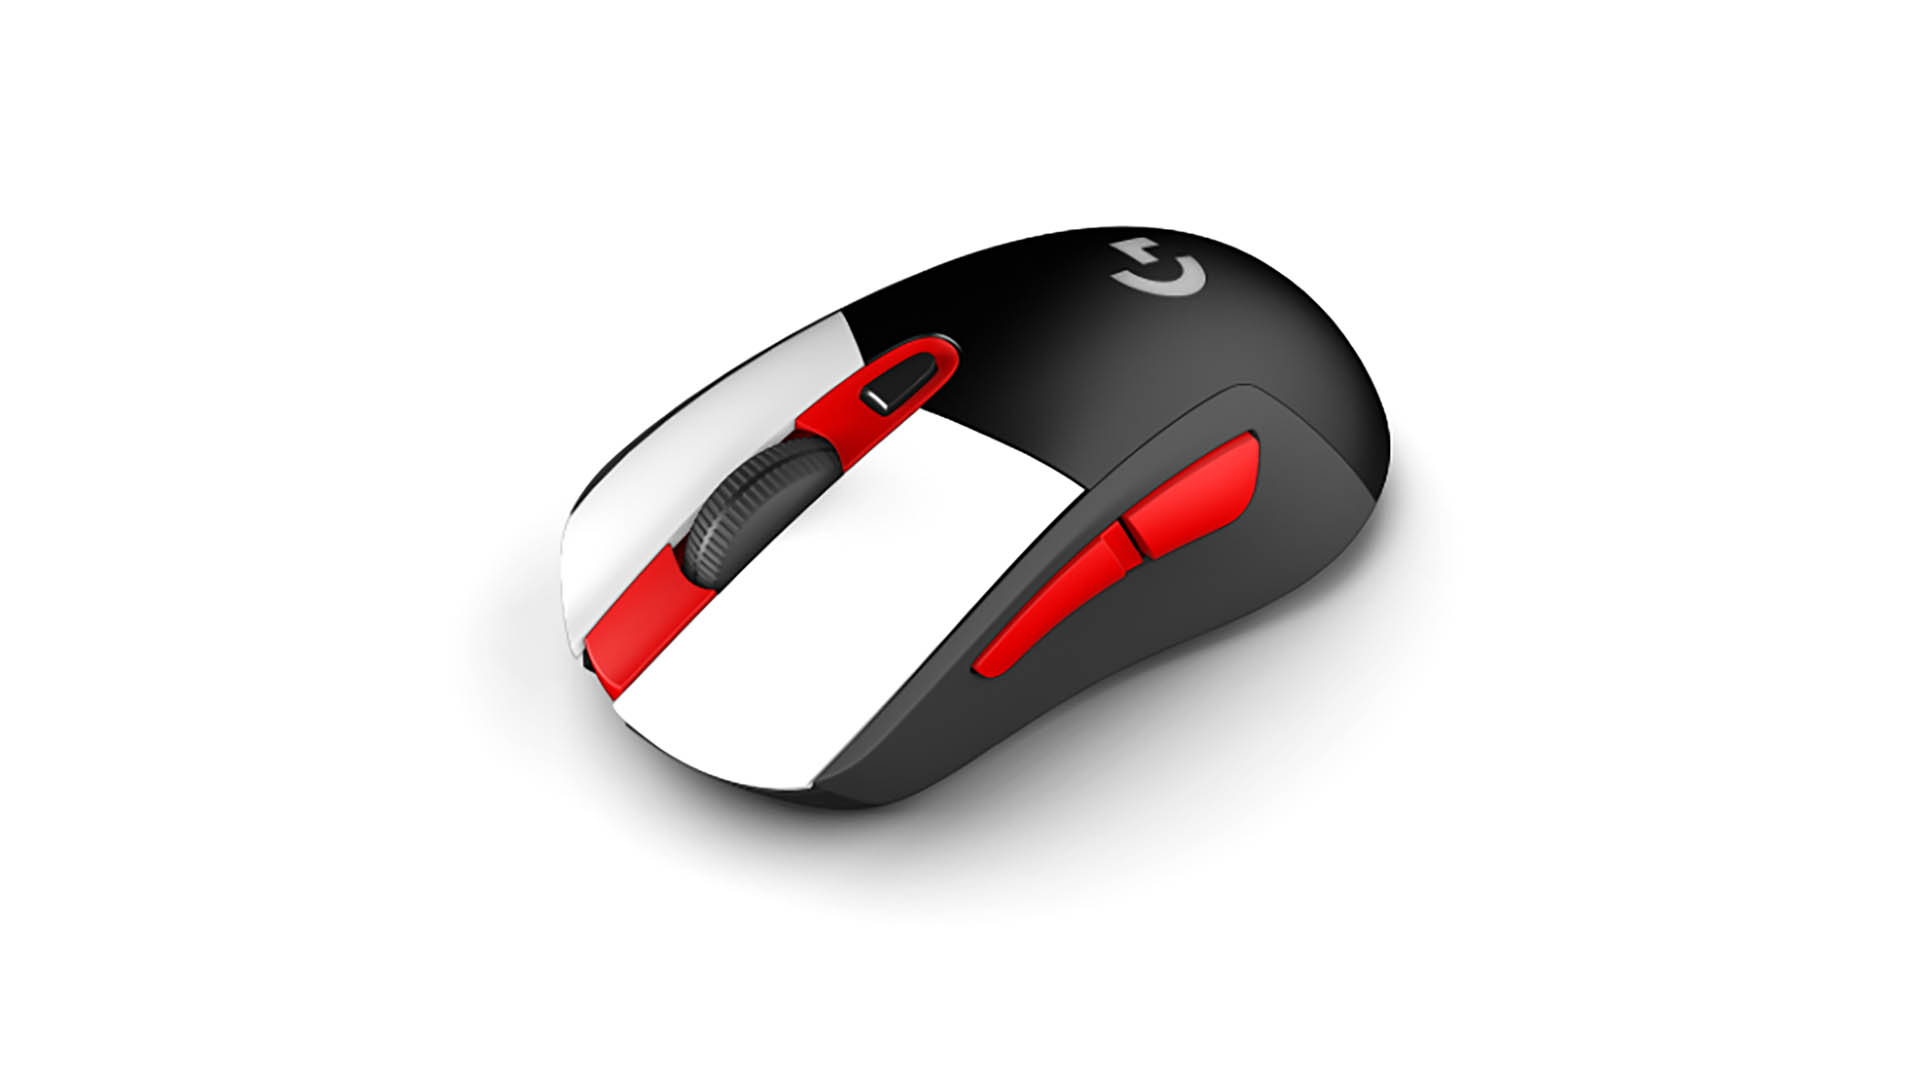 Our favourite MMO mouse just got better